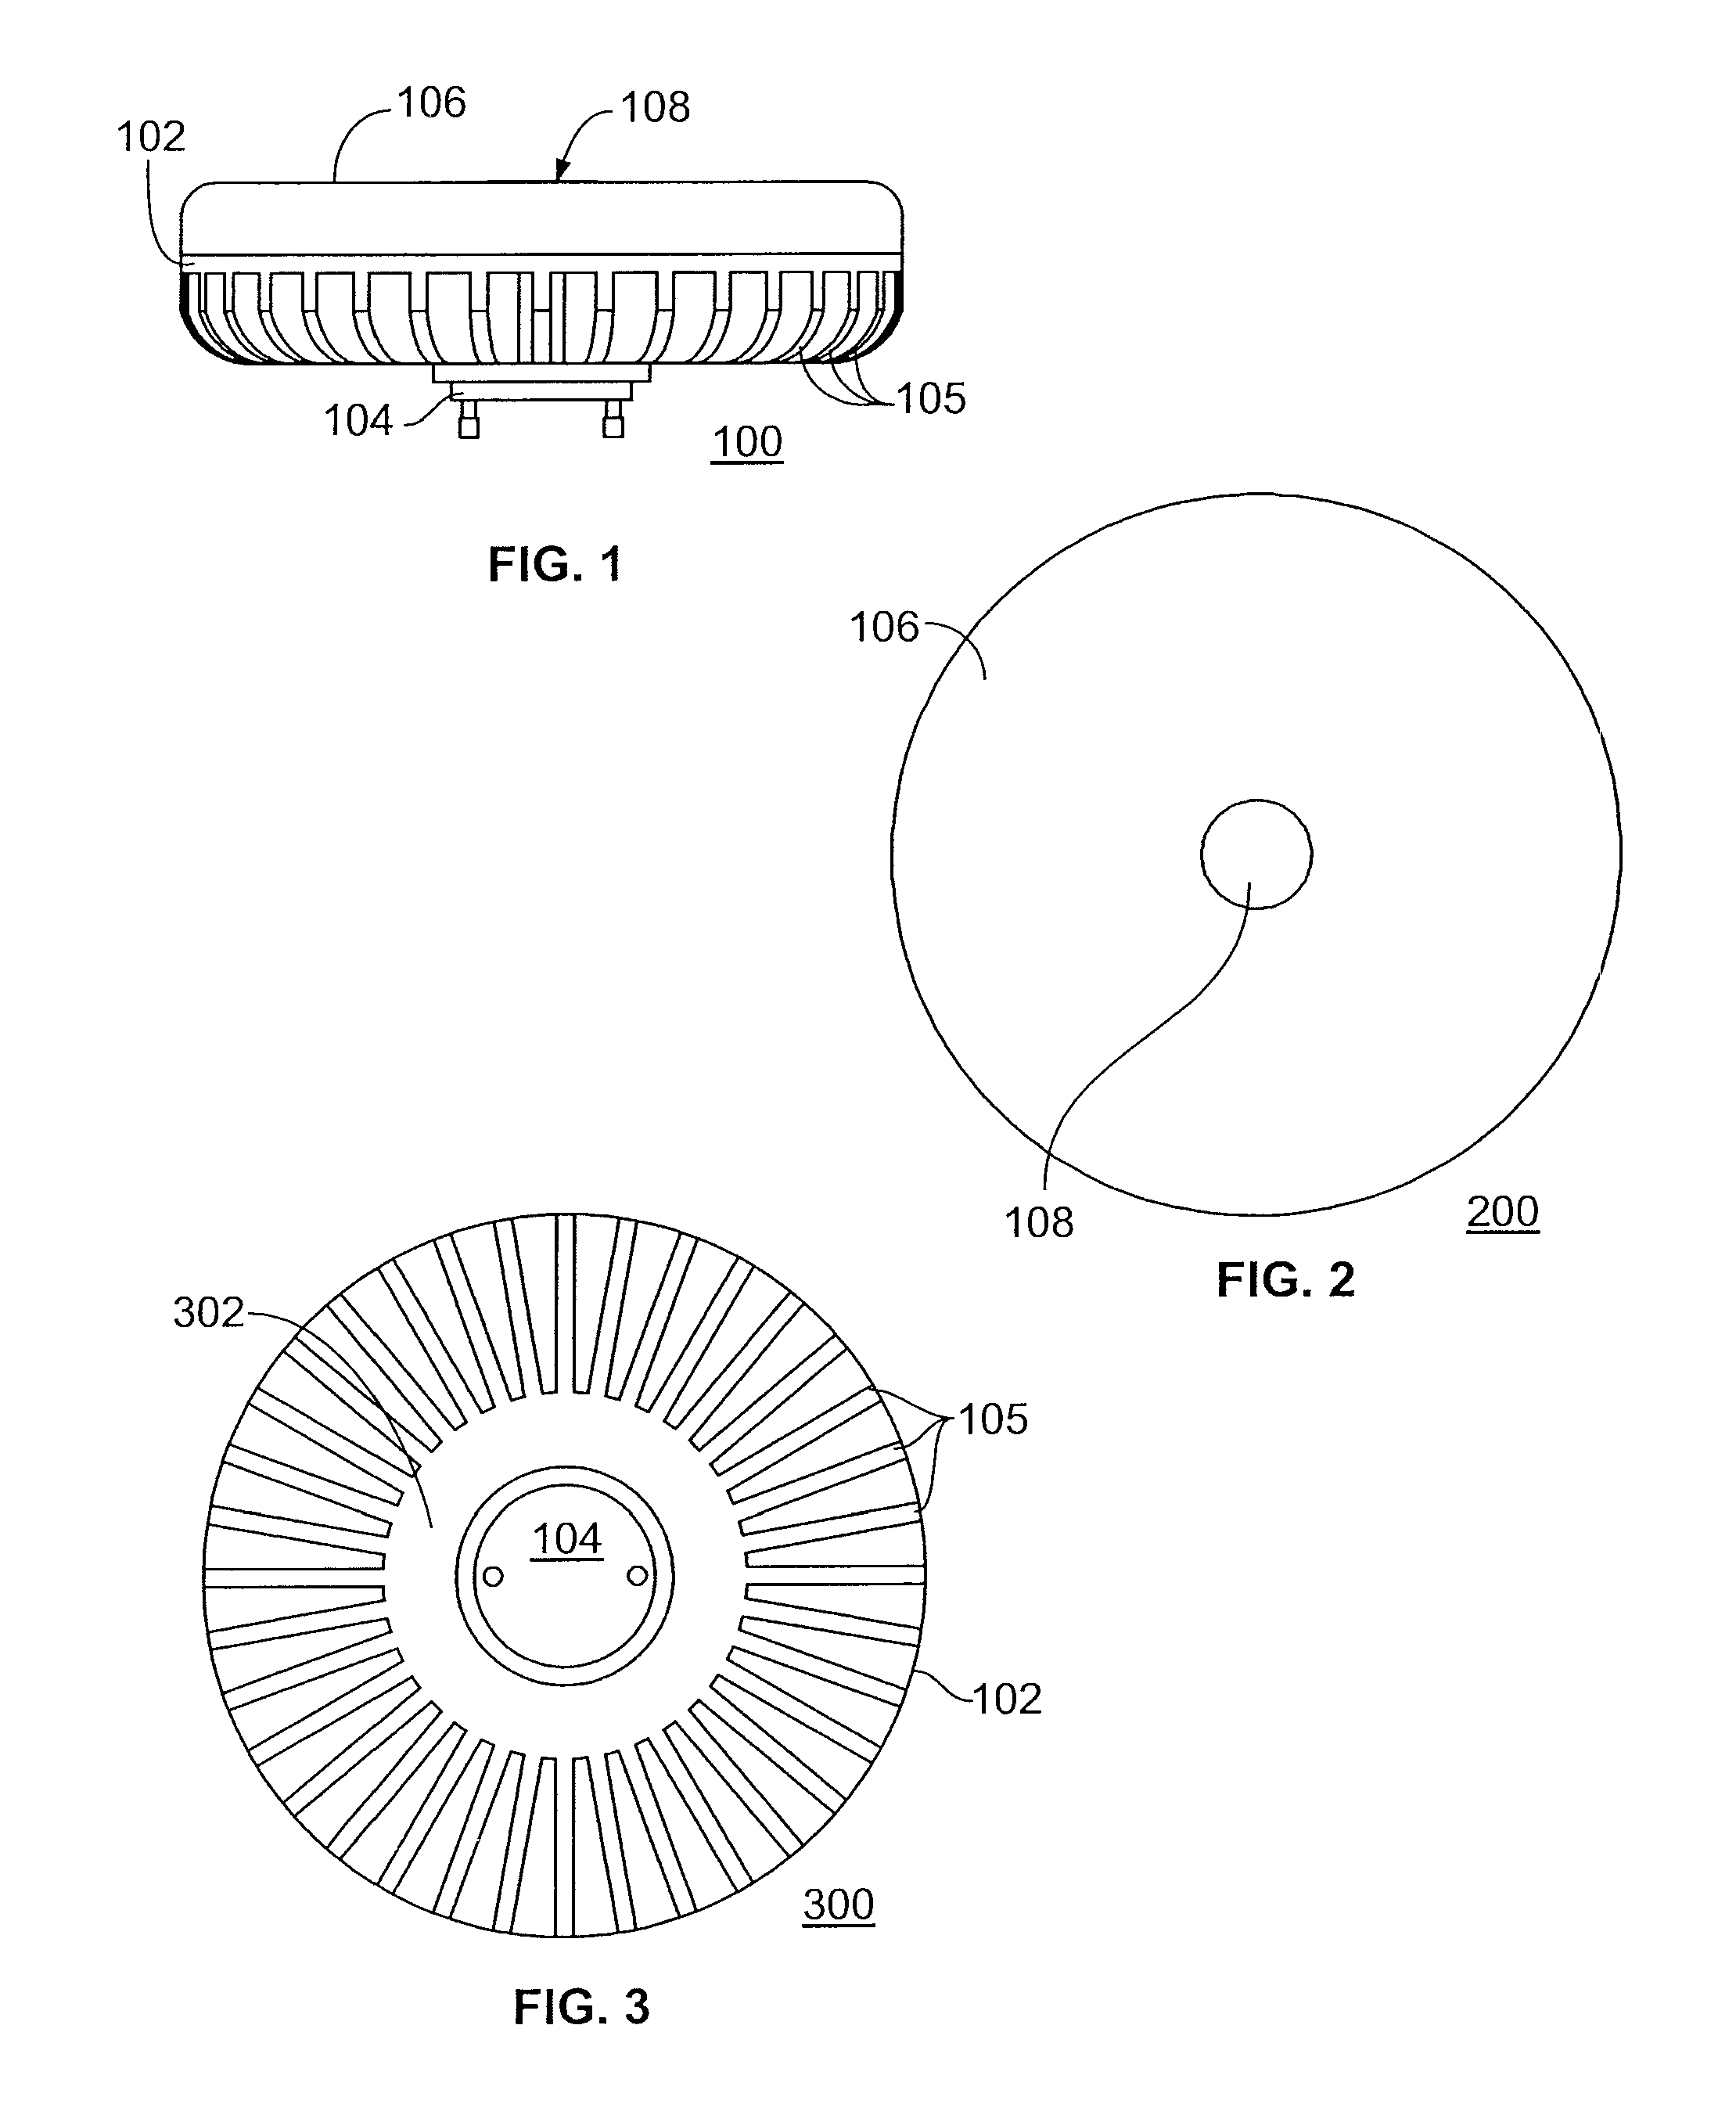 LED illumination device with isolated driving circuitry